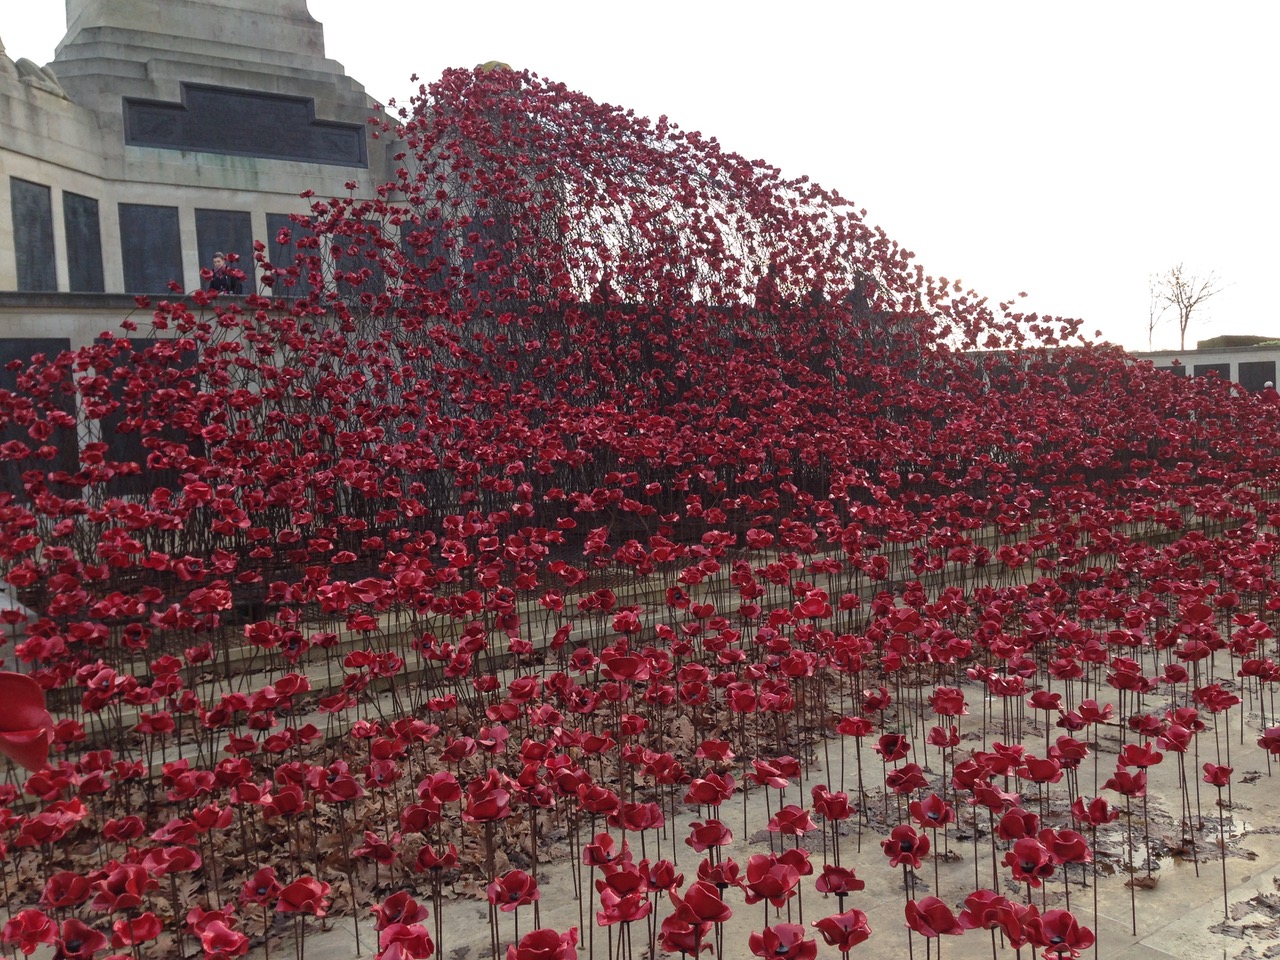 Poppies on the Hoe